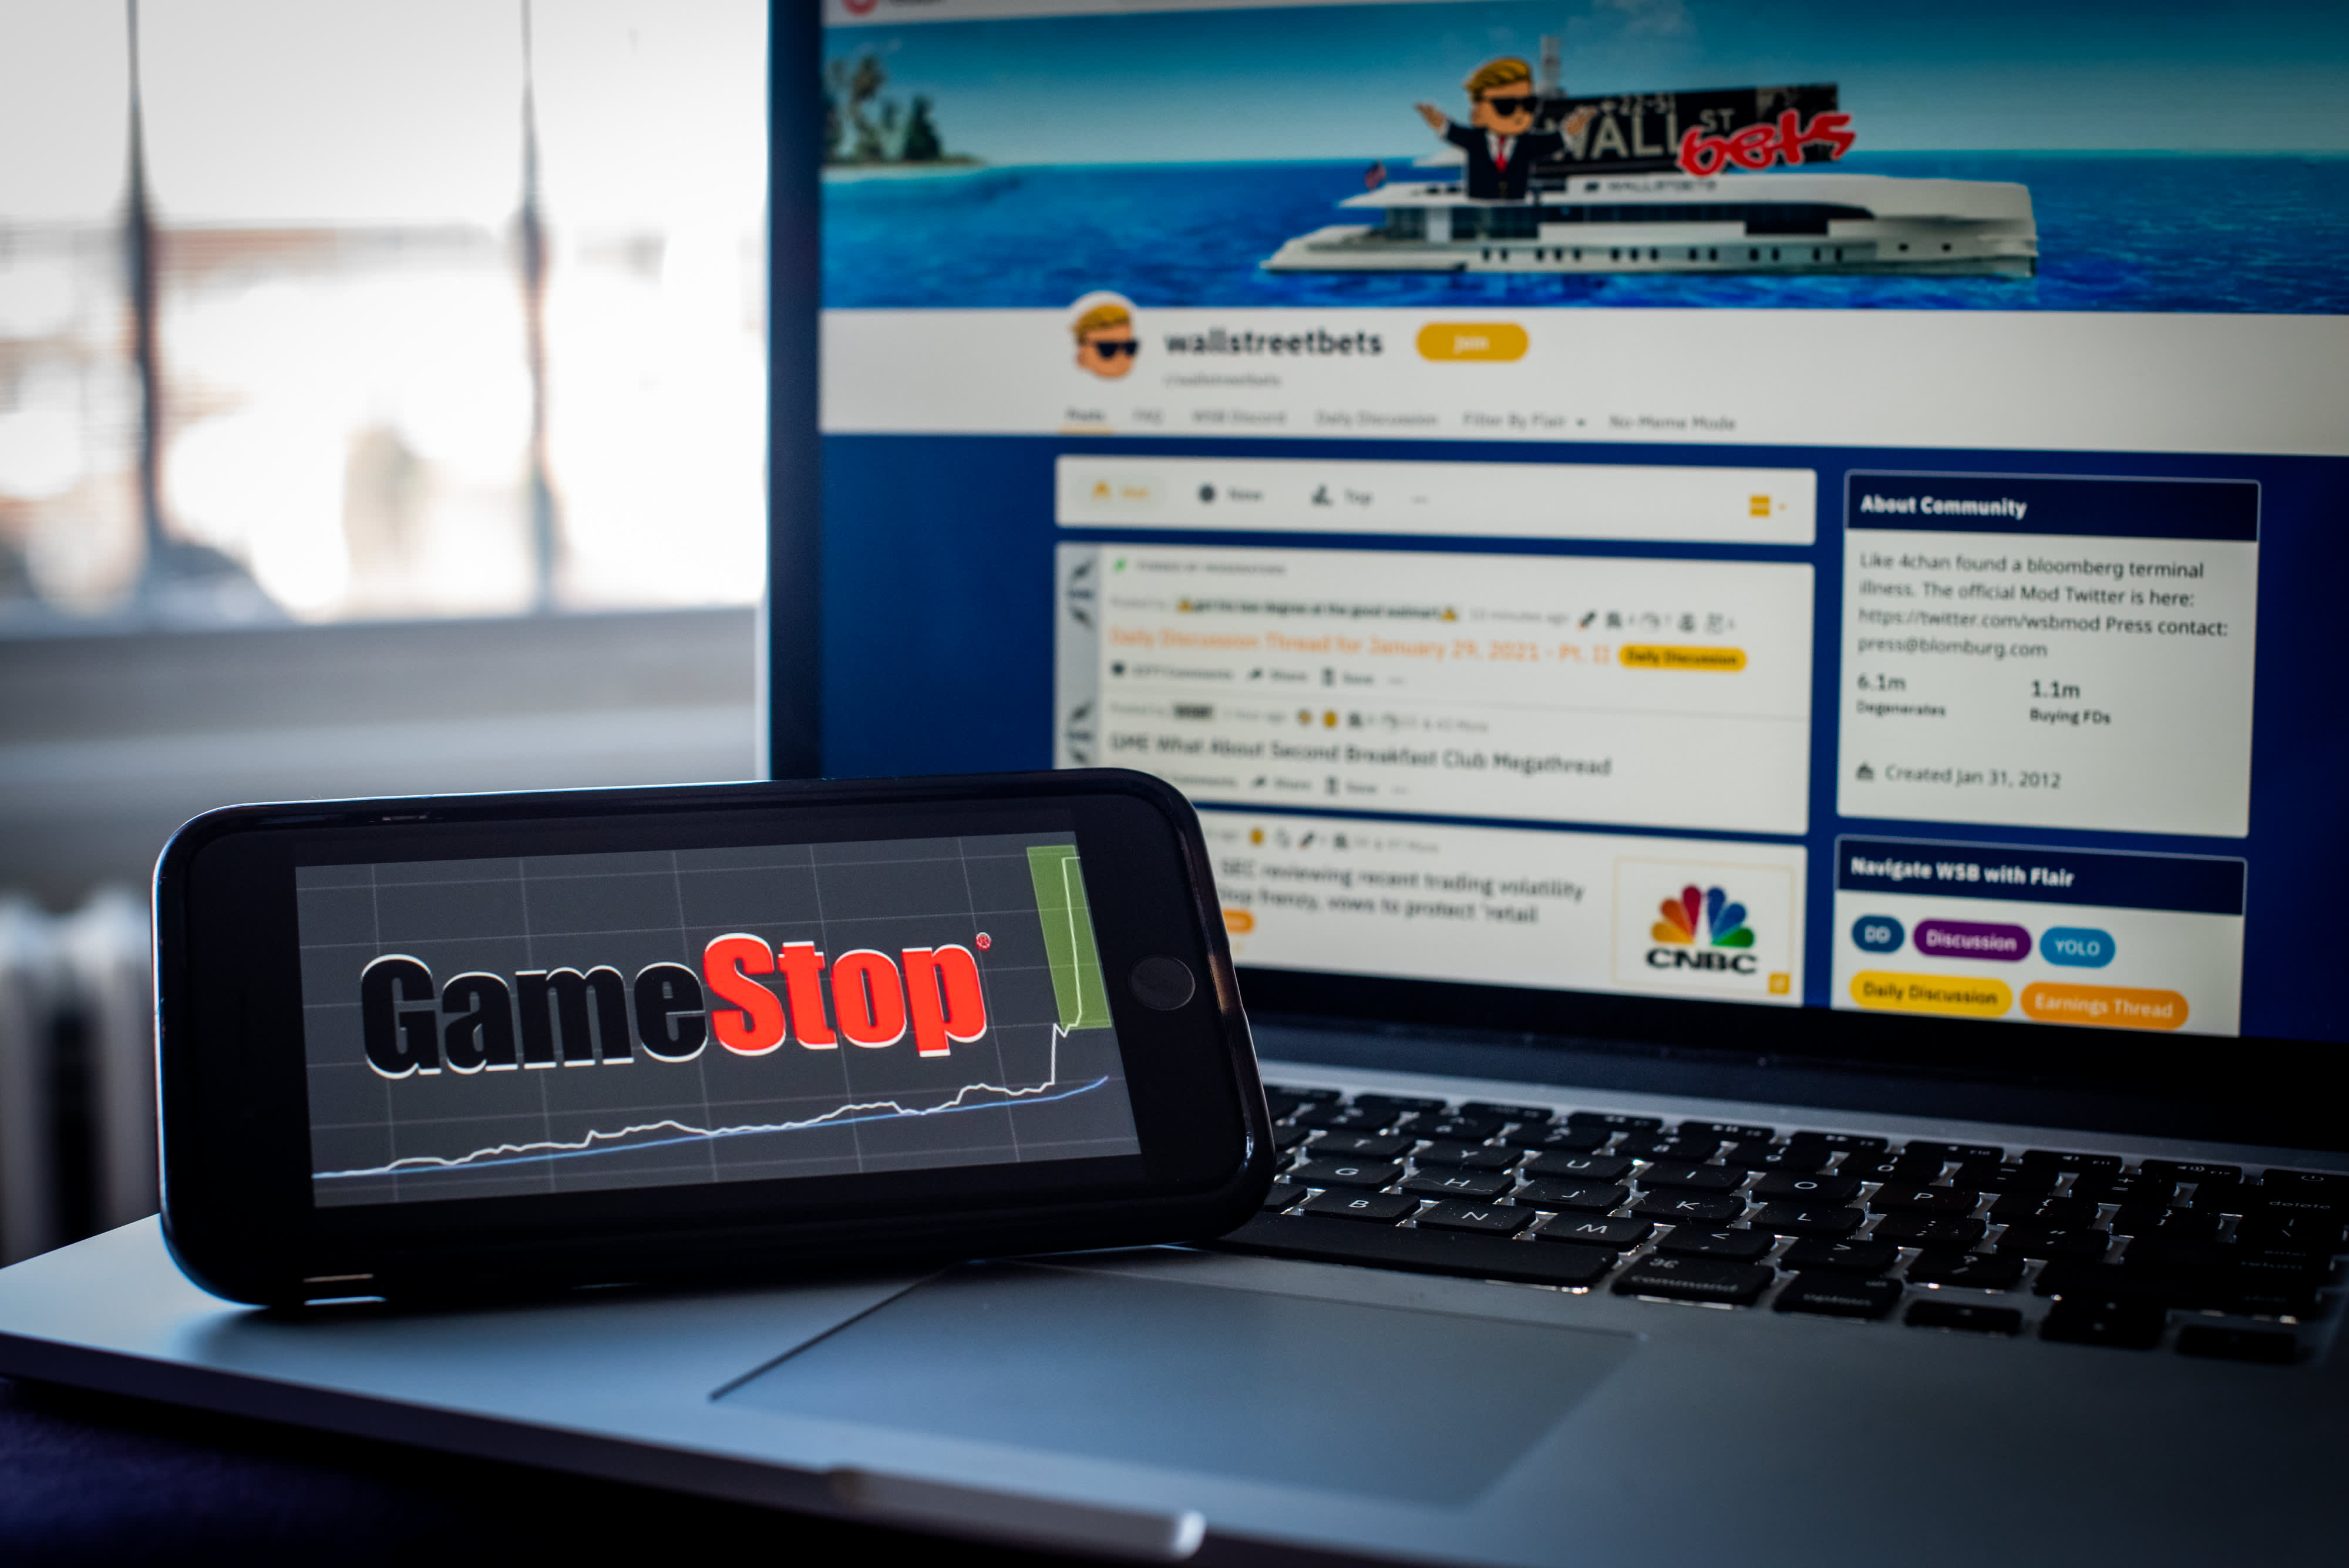 GameStop’s shares rise up 18% in the pre-market as the frenzy continues into February